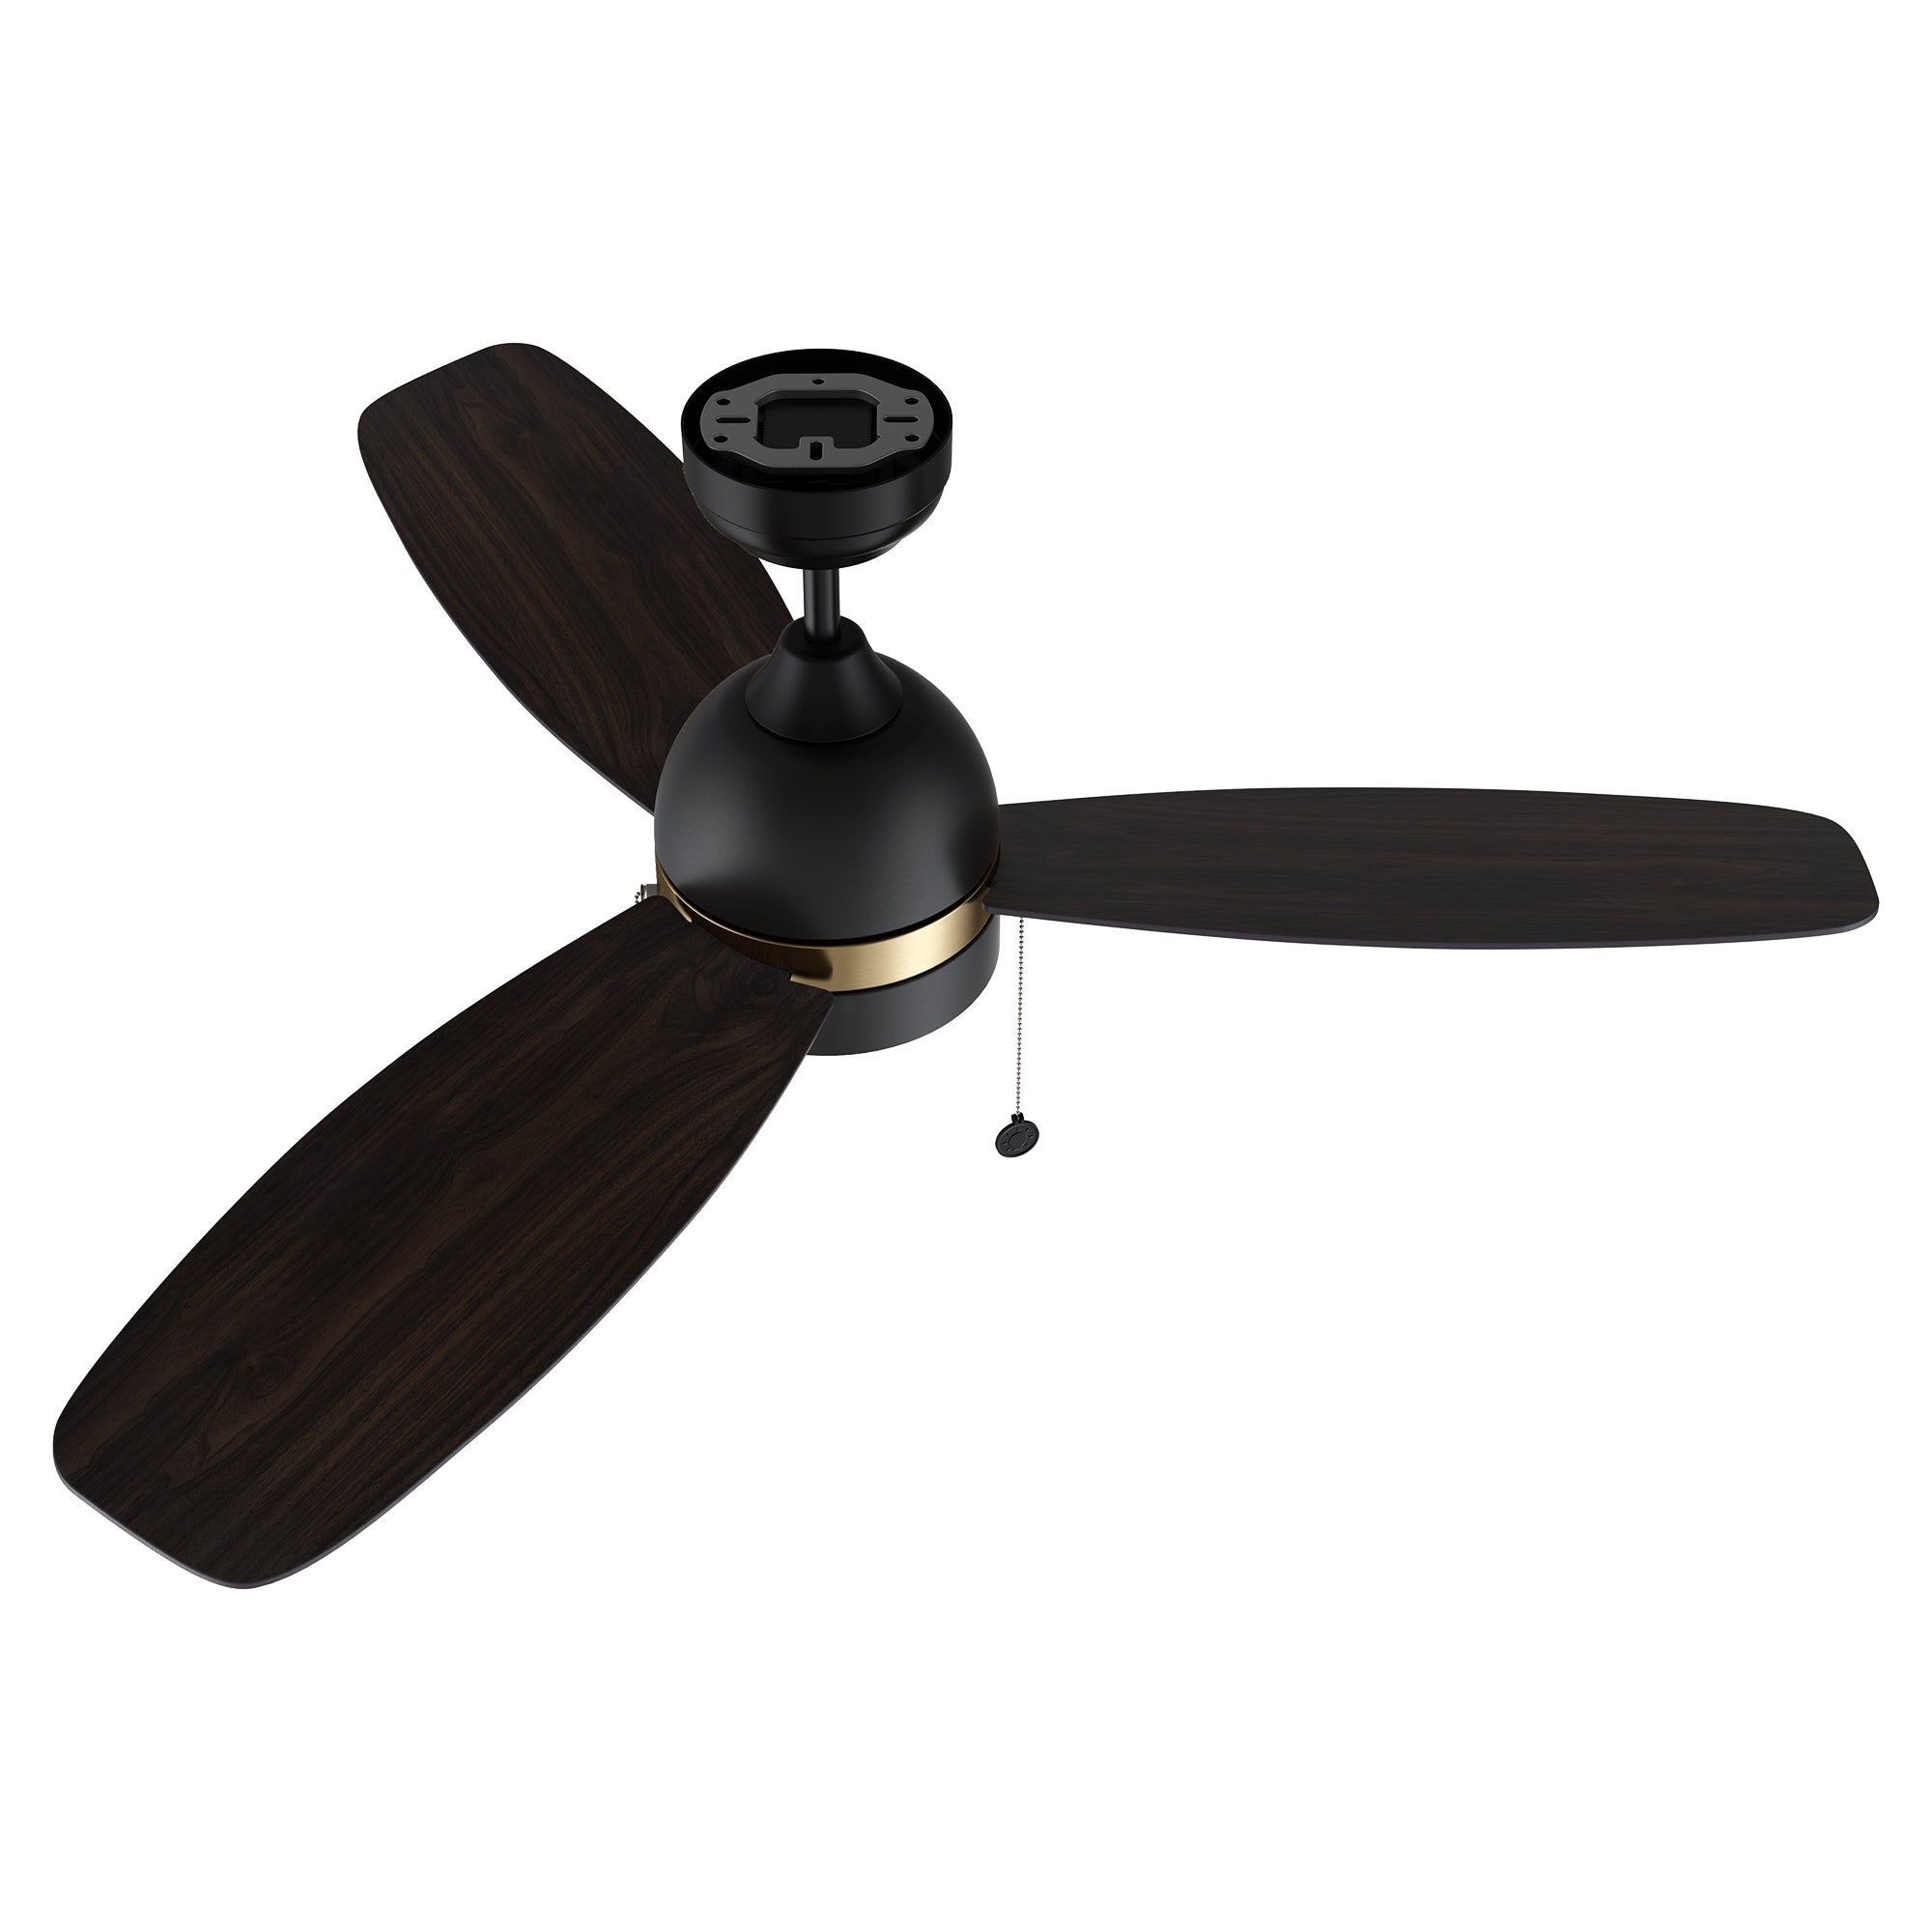 Striking and natural dark wood finish on the fan blades. Enhances the Carro Tesoro pull chain ceiling fan's overall aesthetic with a touch of warmth and sophistication. #color_Dark-Wood